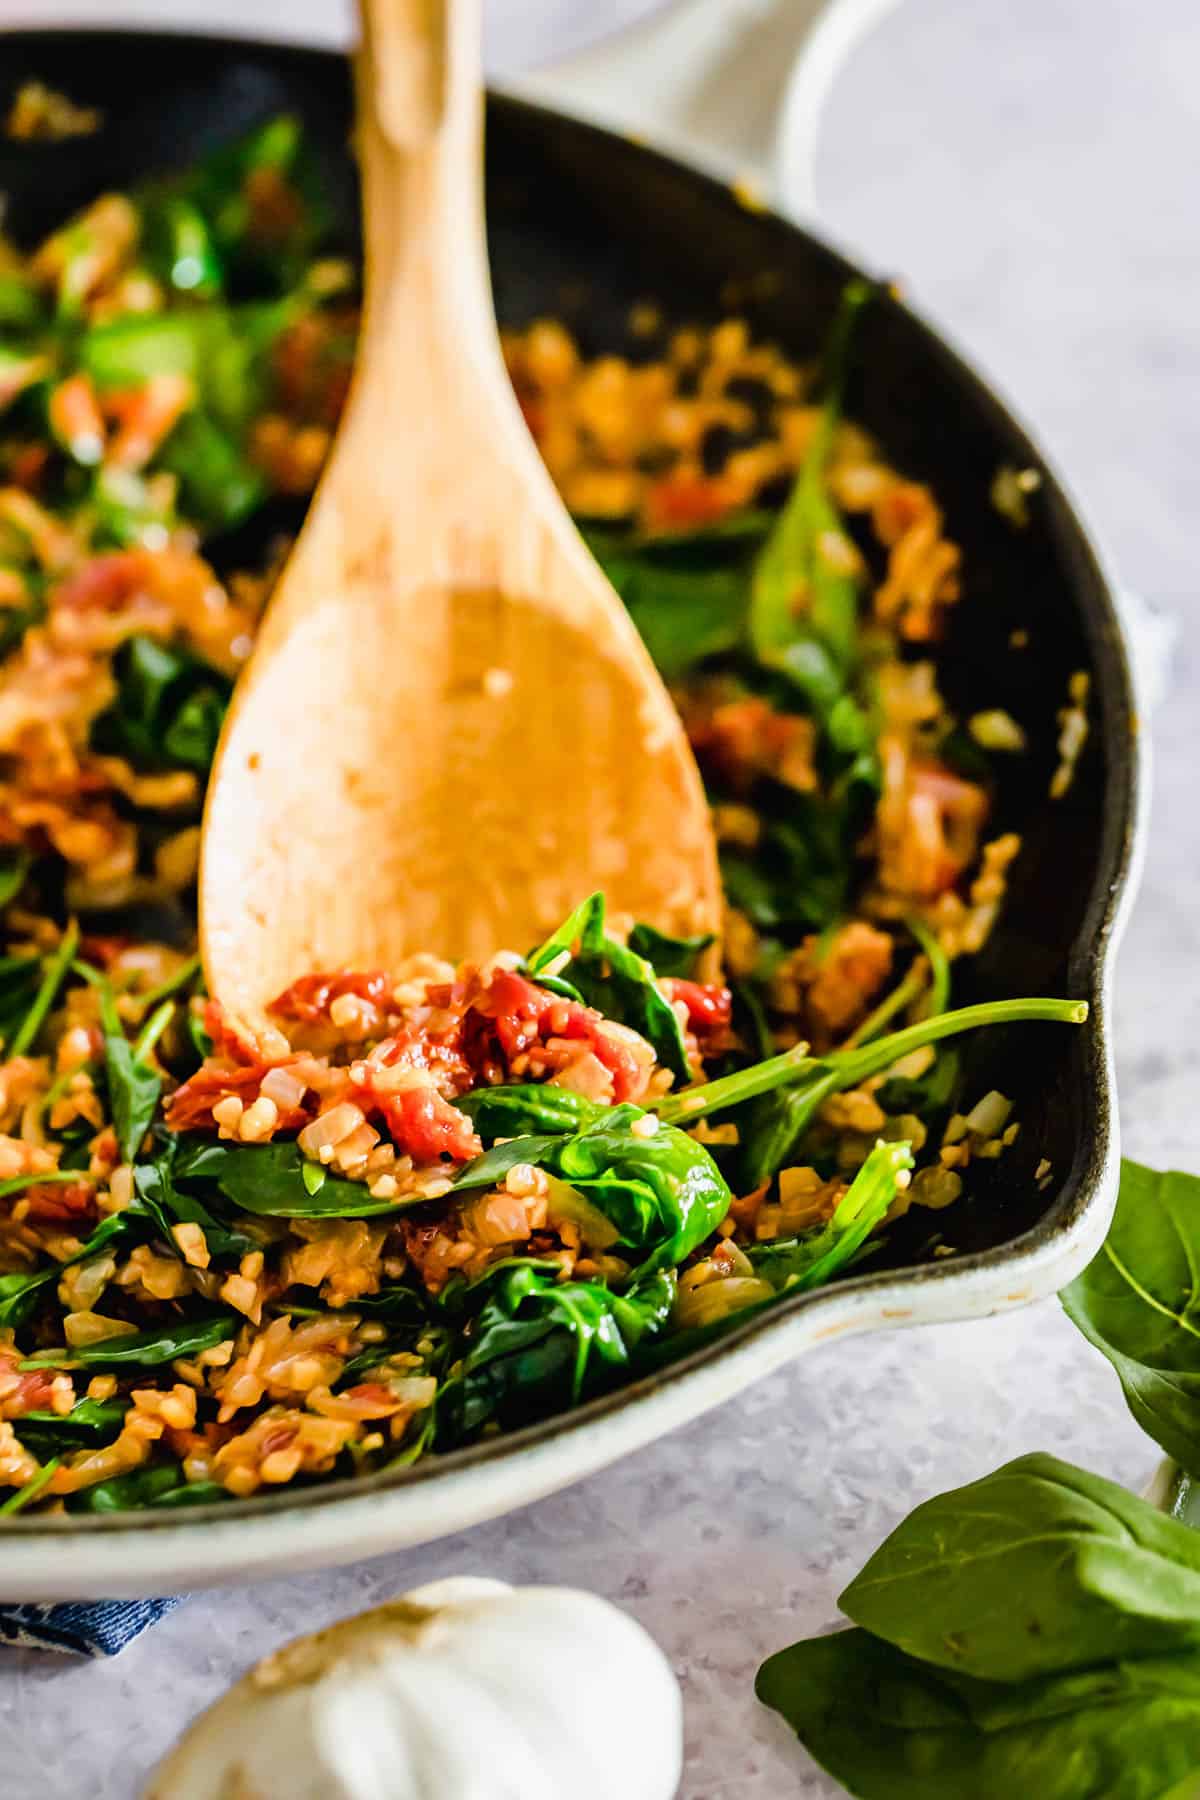 A skillet with spinach and sauteed onion, garlic and sun-dried tomatoes with a wooden spoon, with garlic cloves nearby.